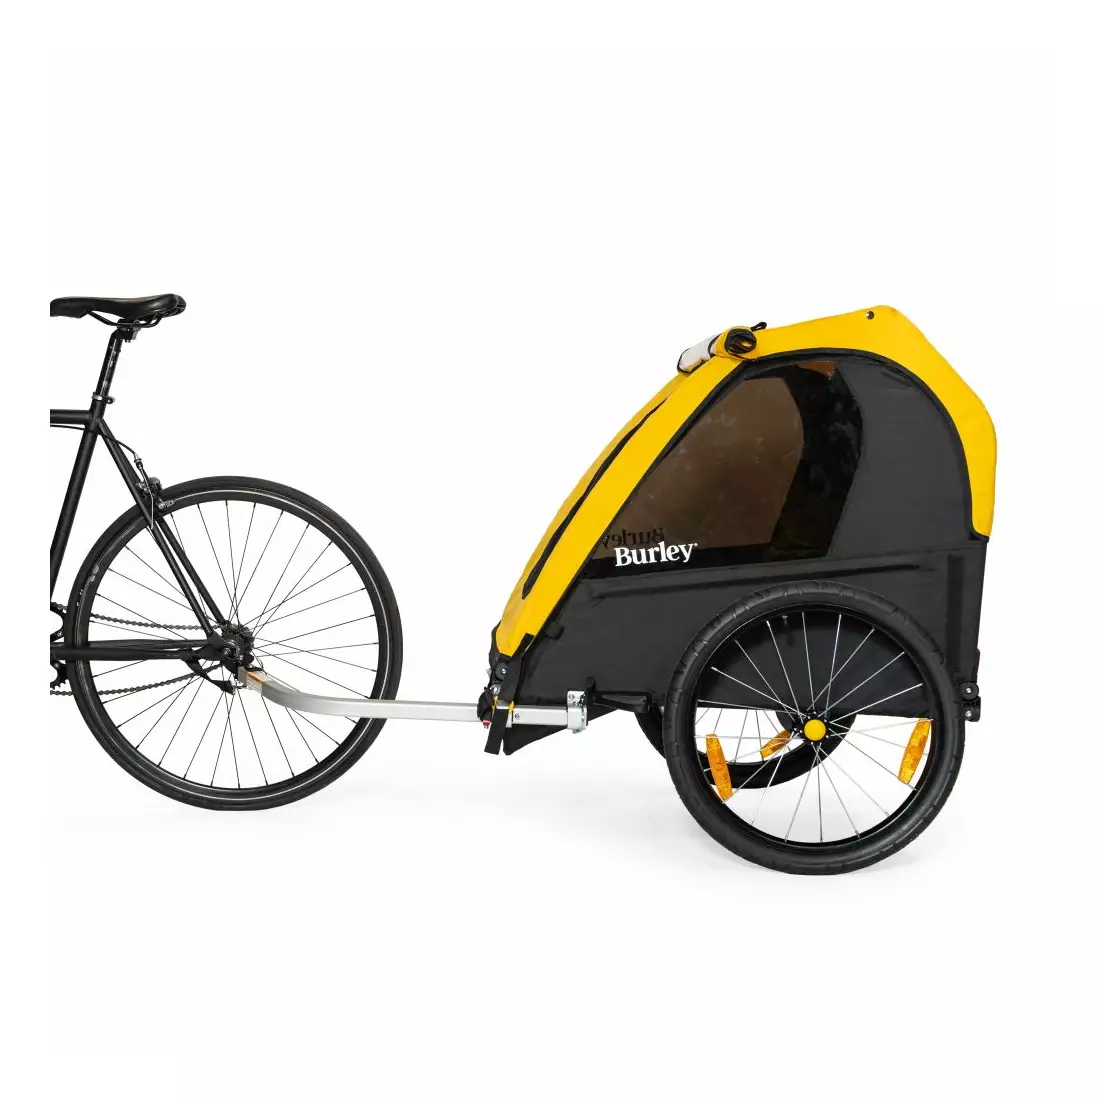 BURLEY BEE DOUBLE children's bicycle trailer, black and yellow